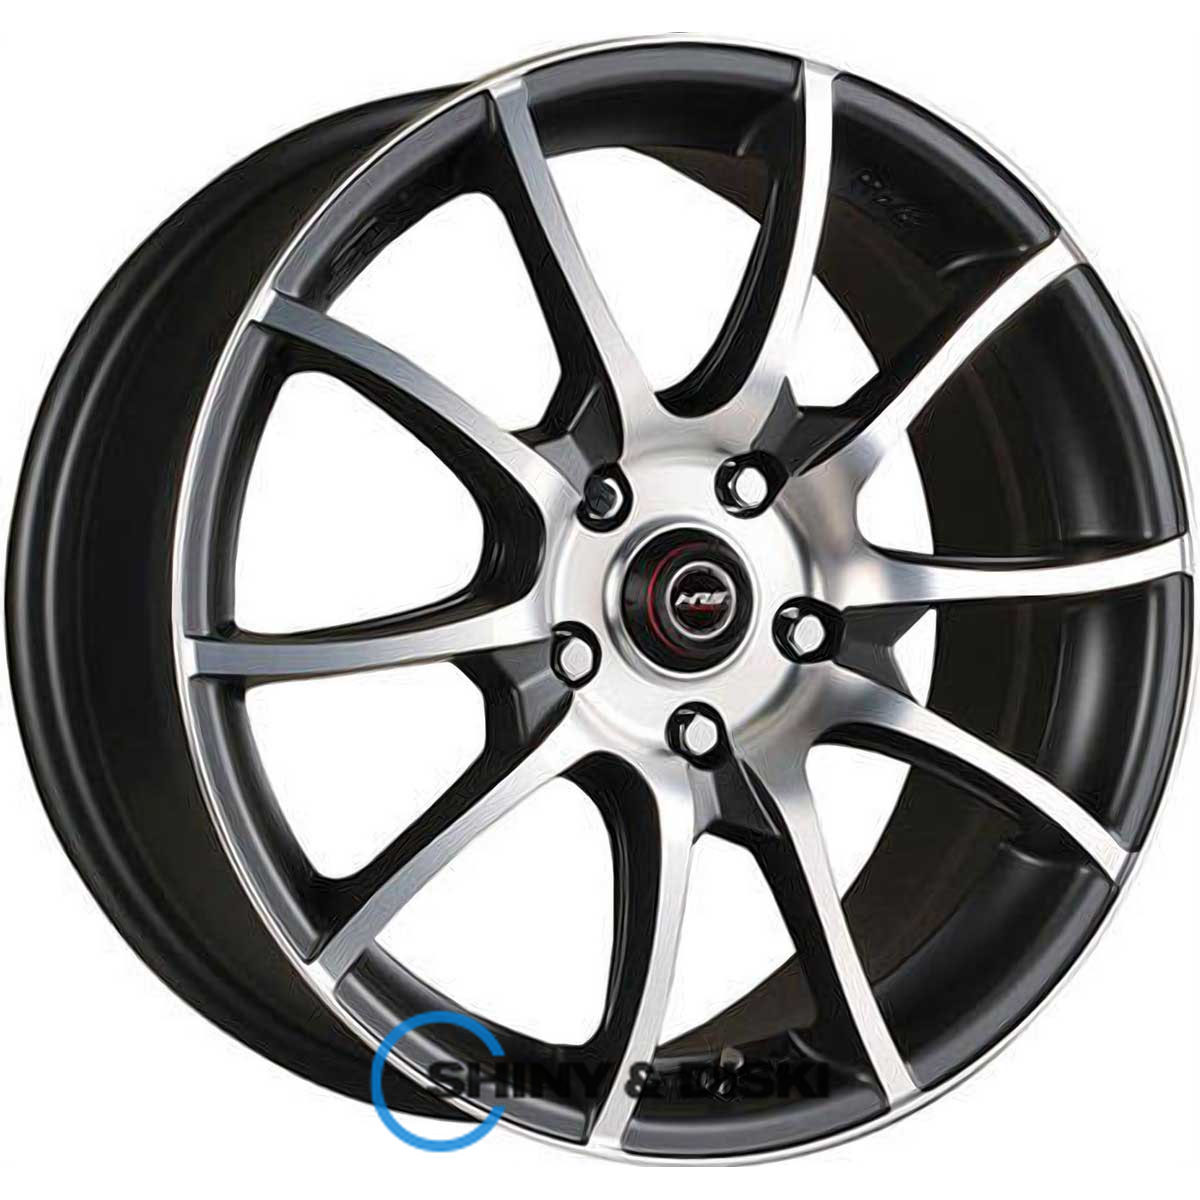 rs tuning h-470 bkfp r16 w7 pcd5x114.3 et40 dia67.1